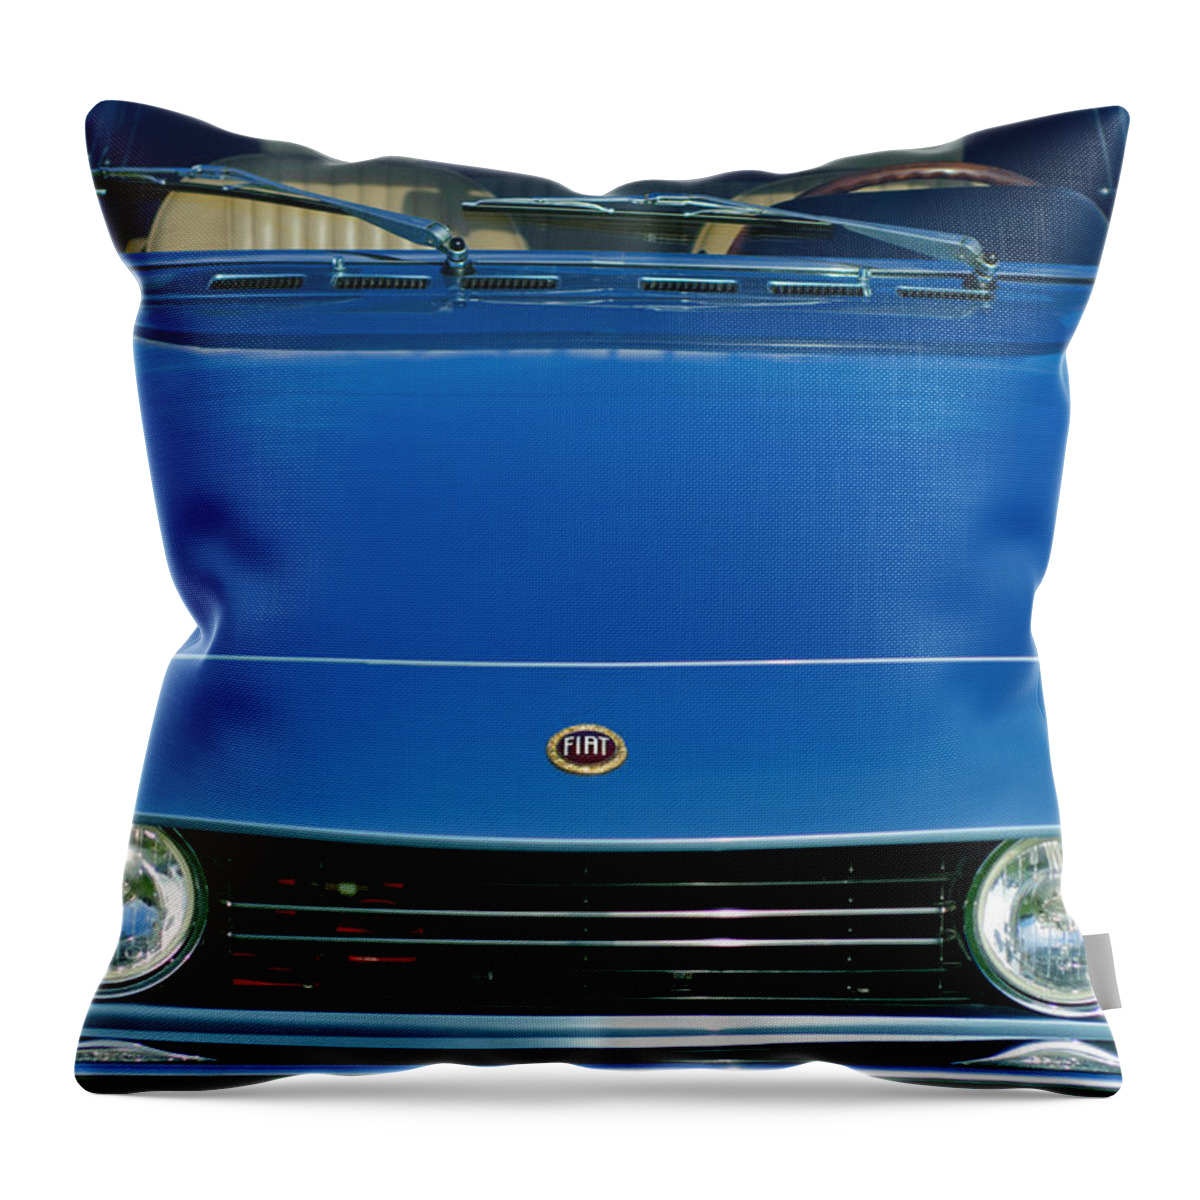 1971 Fiat Dino 2.4 Grille Throw Pillow featuring the photograph 1971 Fiat Dino 2.4 Grille by Jill Reger